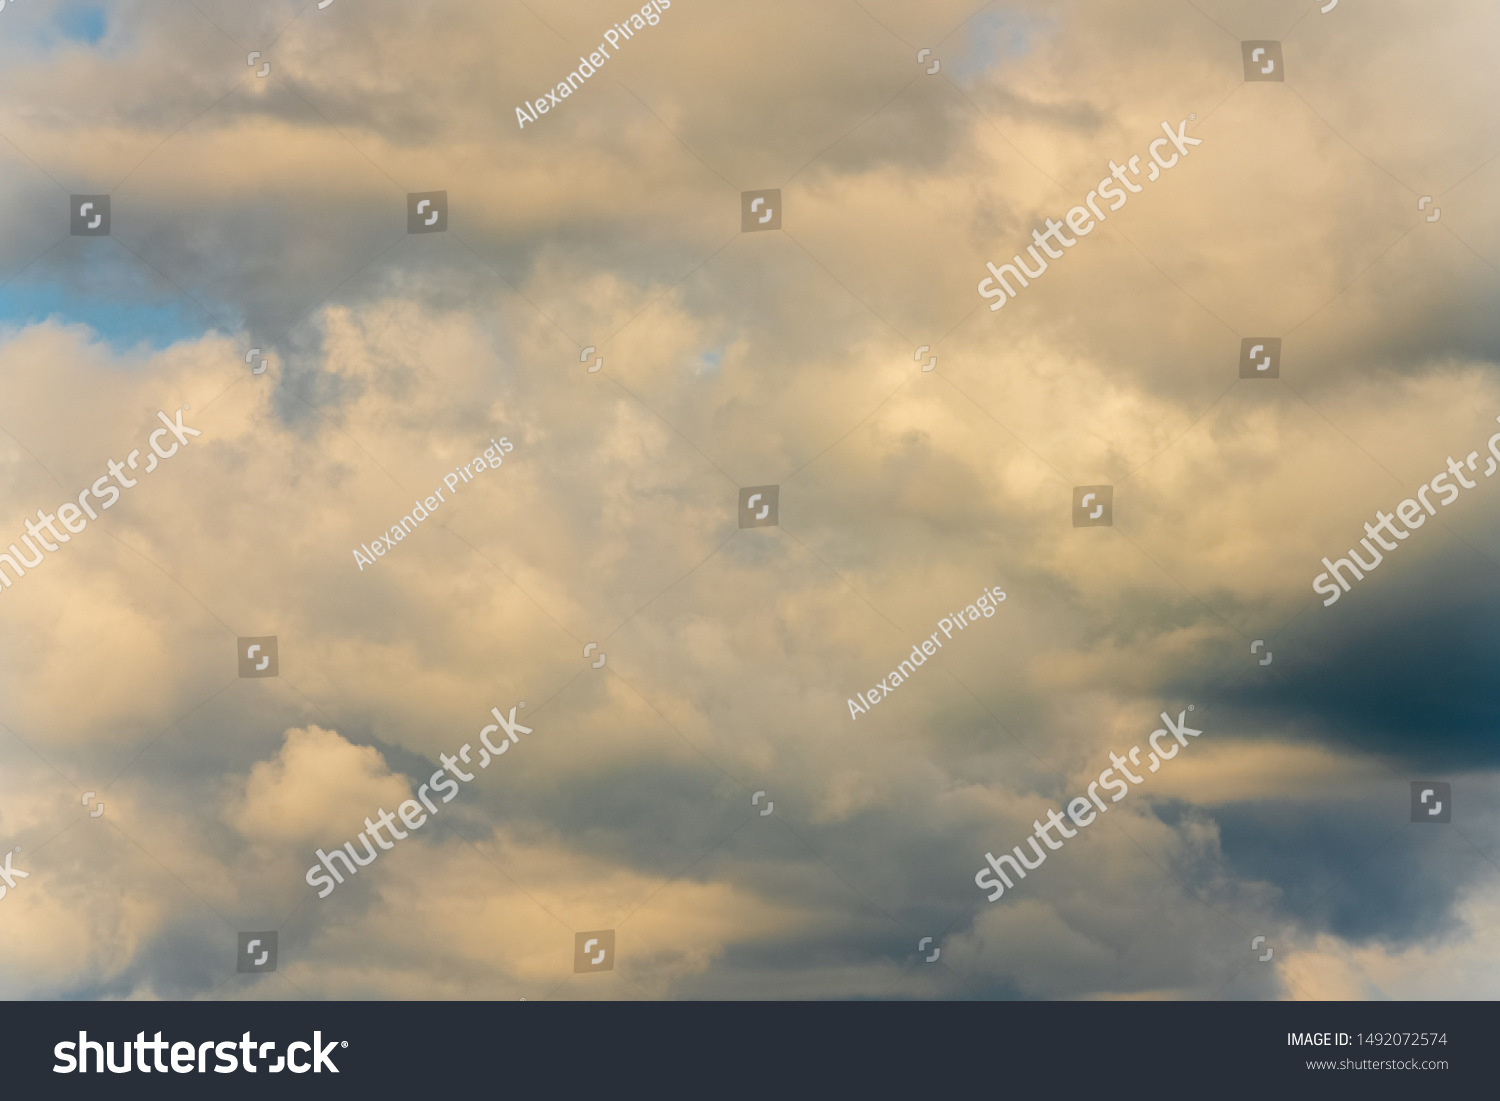 Stunning summer cloud scape - natural meteorology abstract background clouds floating across sky to change weather. Optical and atmospheric dispersion, soft focus, motion blur clouds. #1492072574